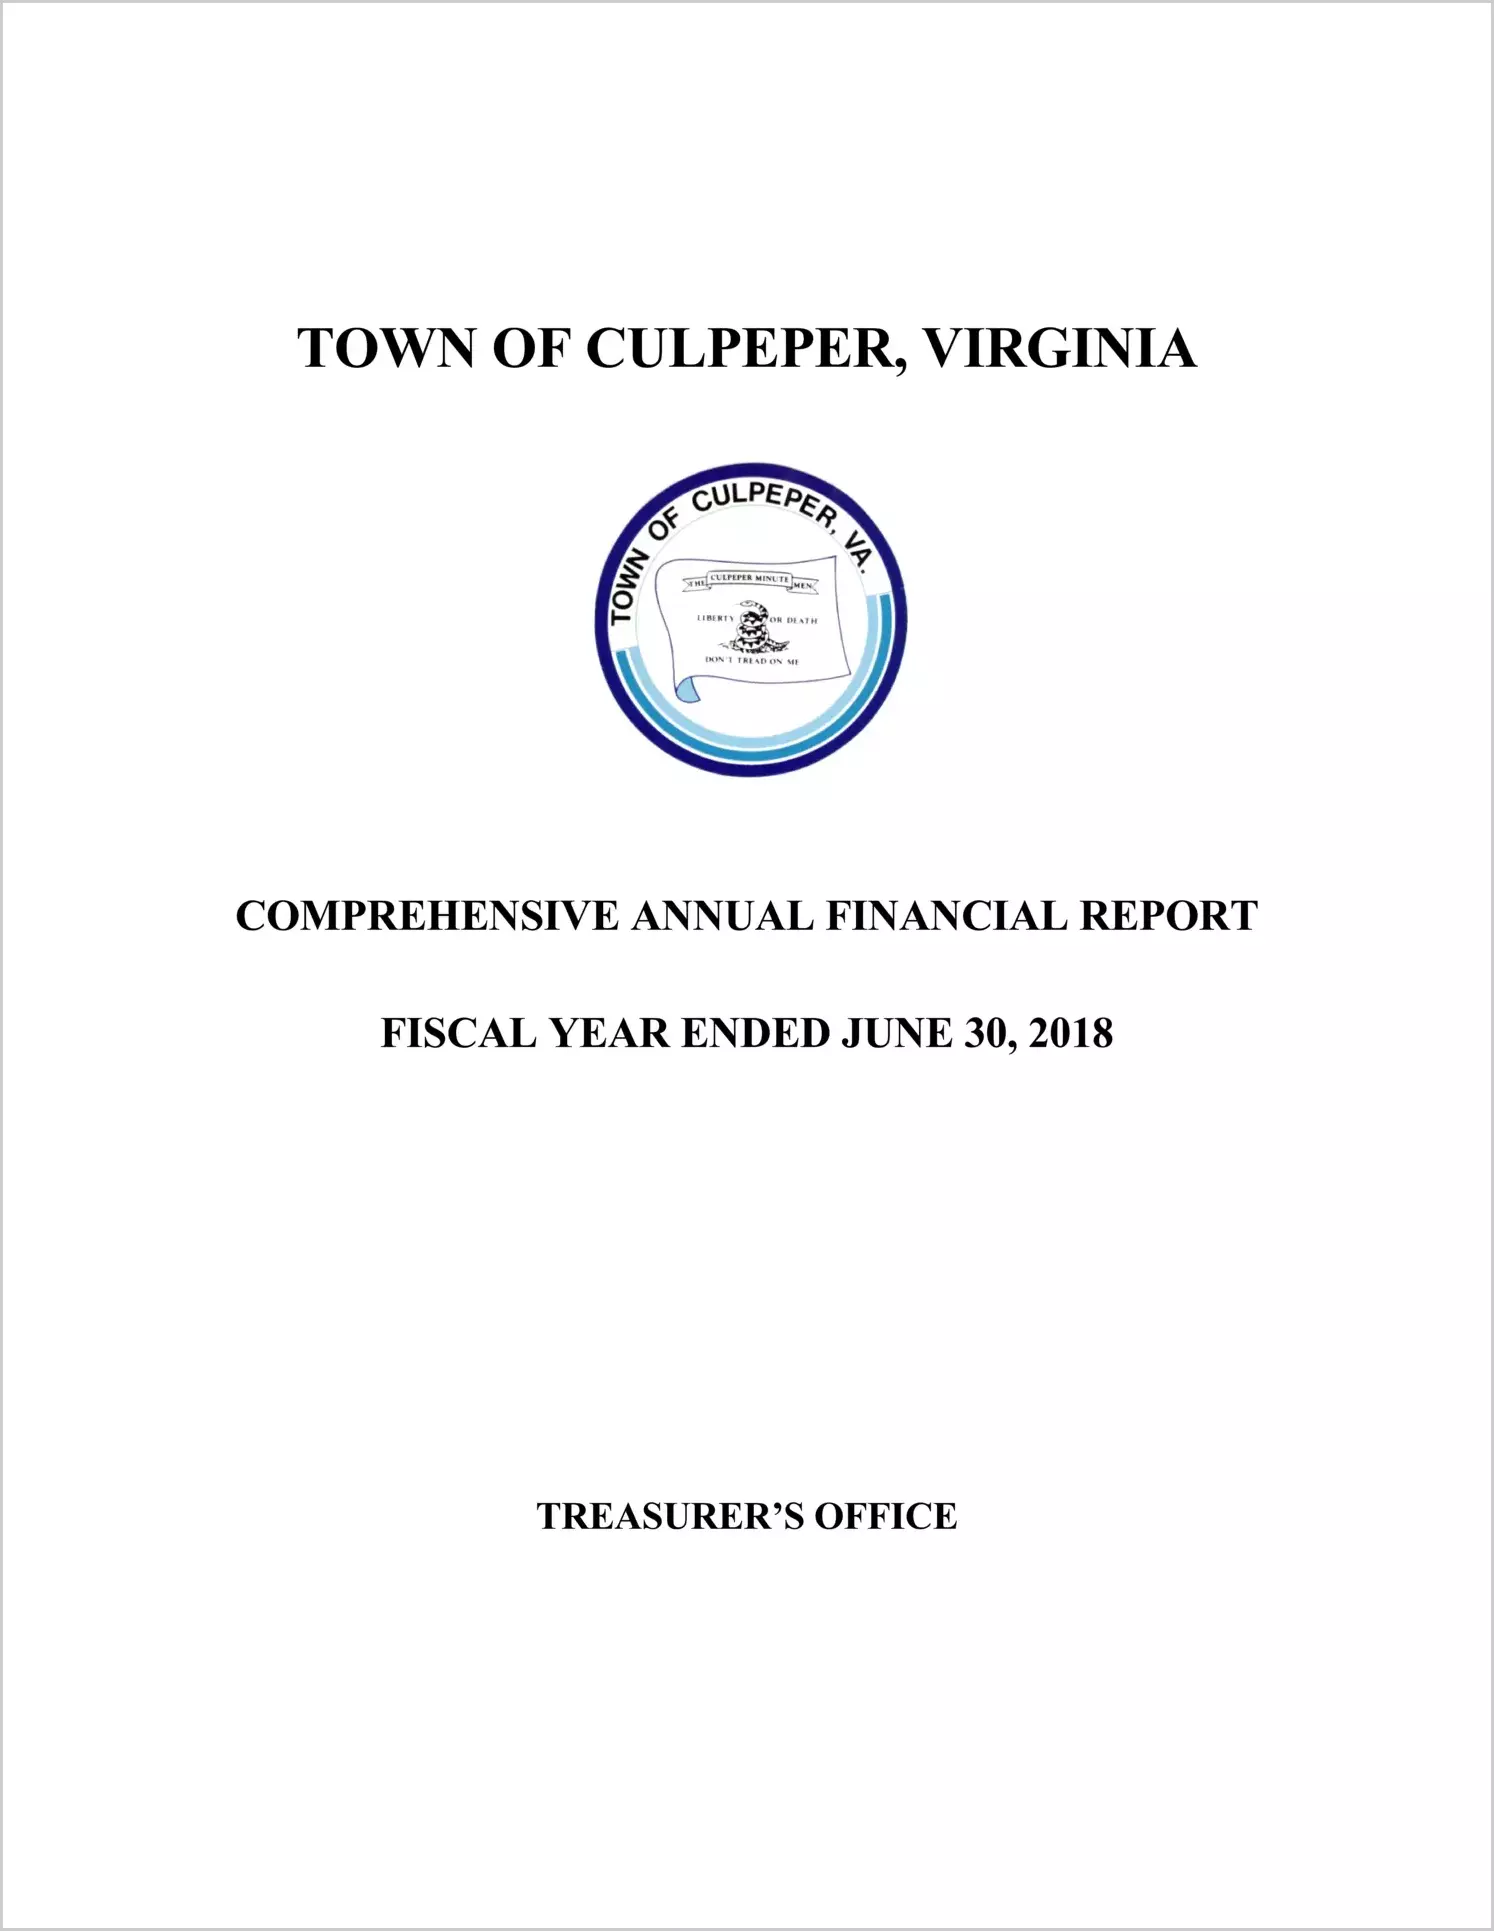 2018 Annual Financial Report for Town of Culpeper